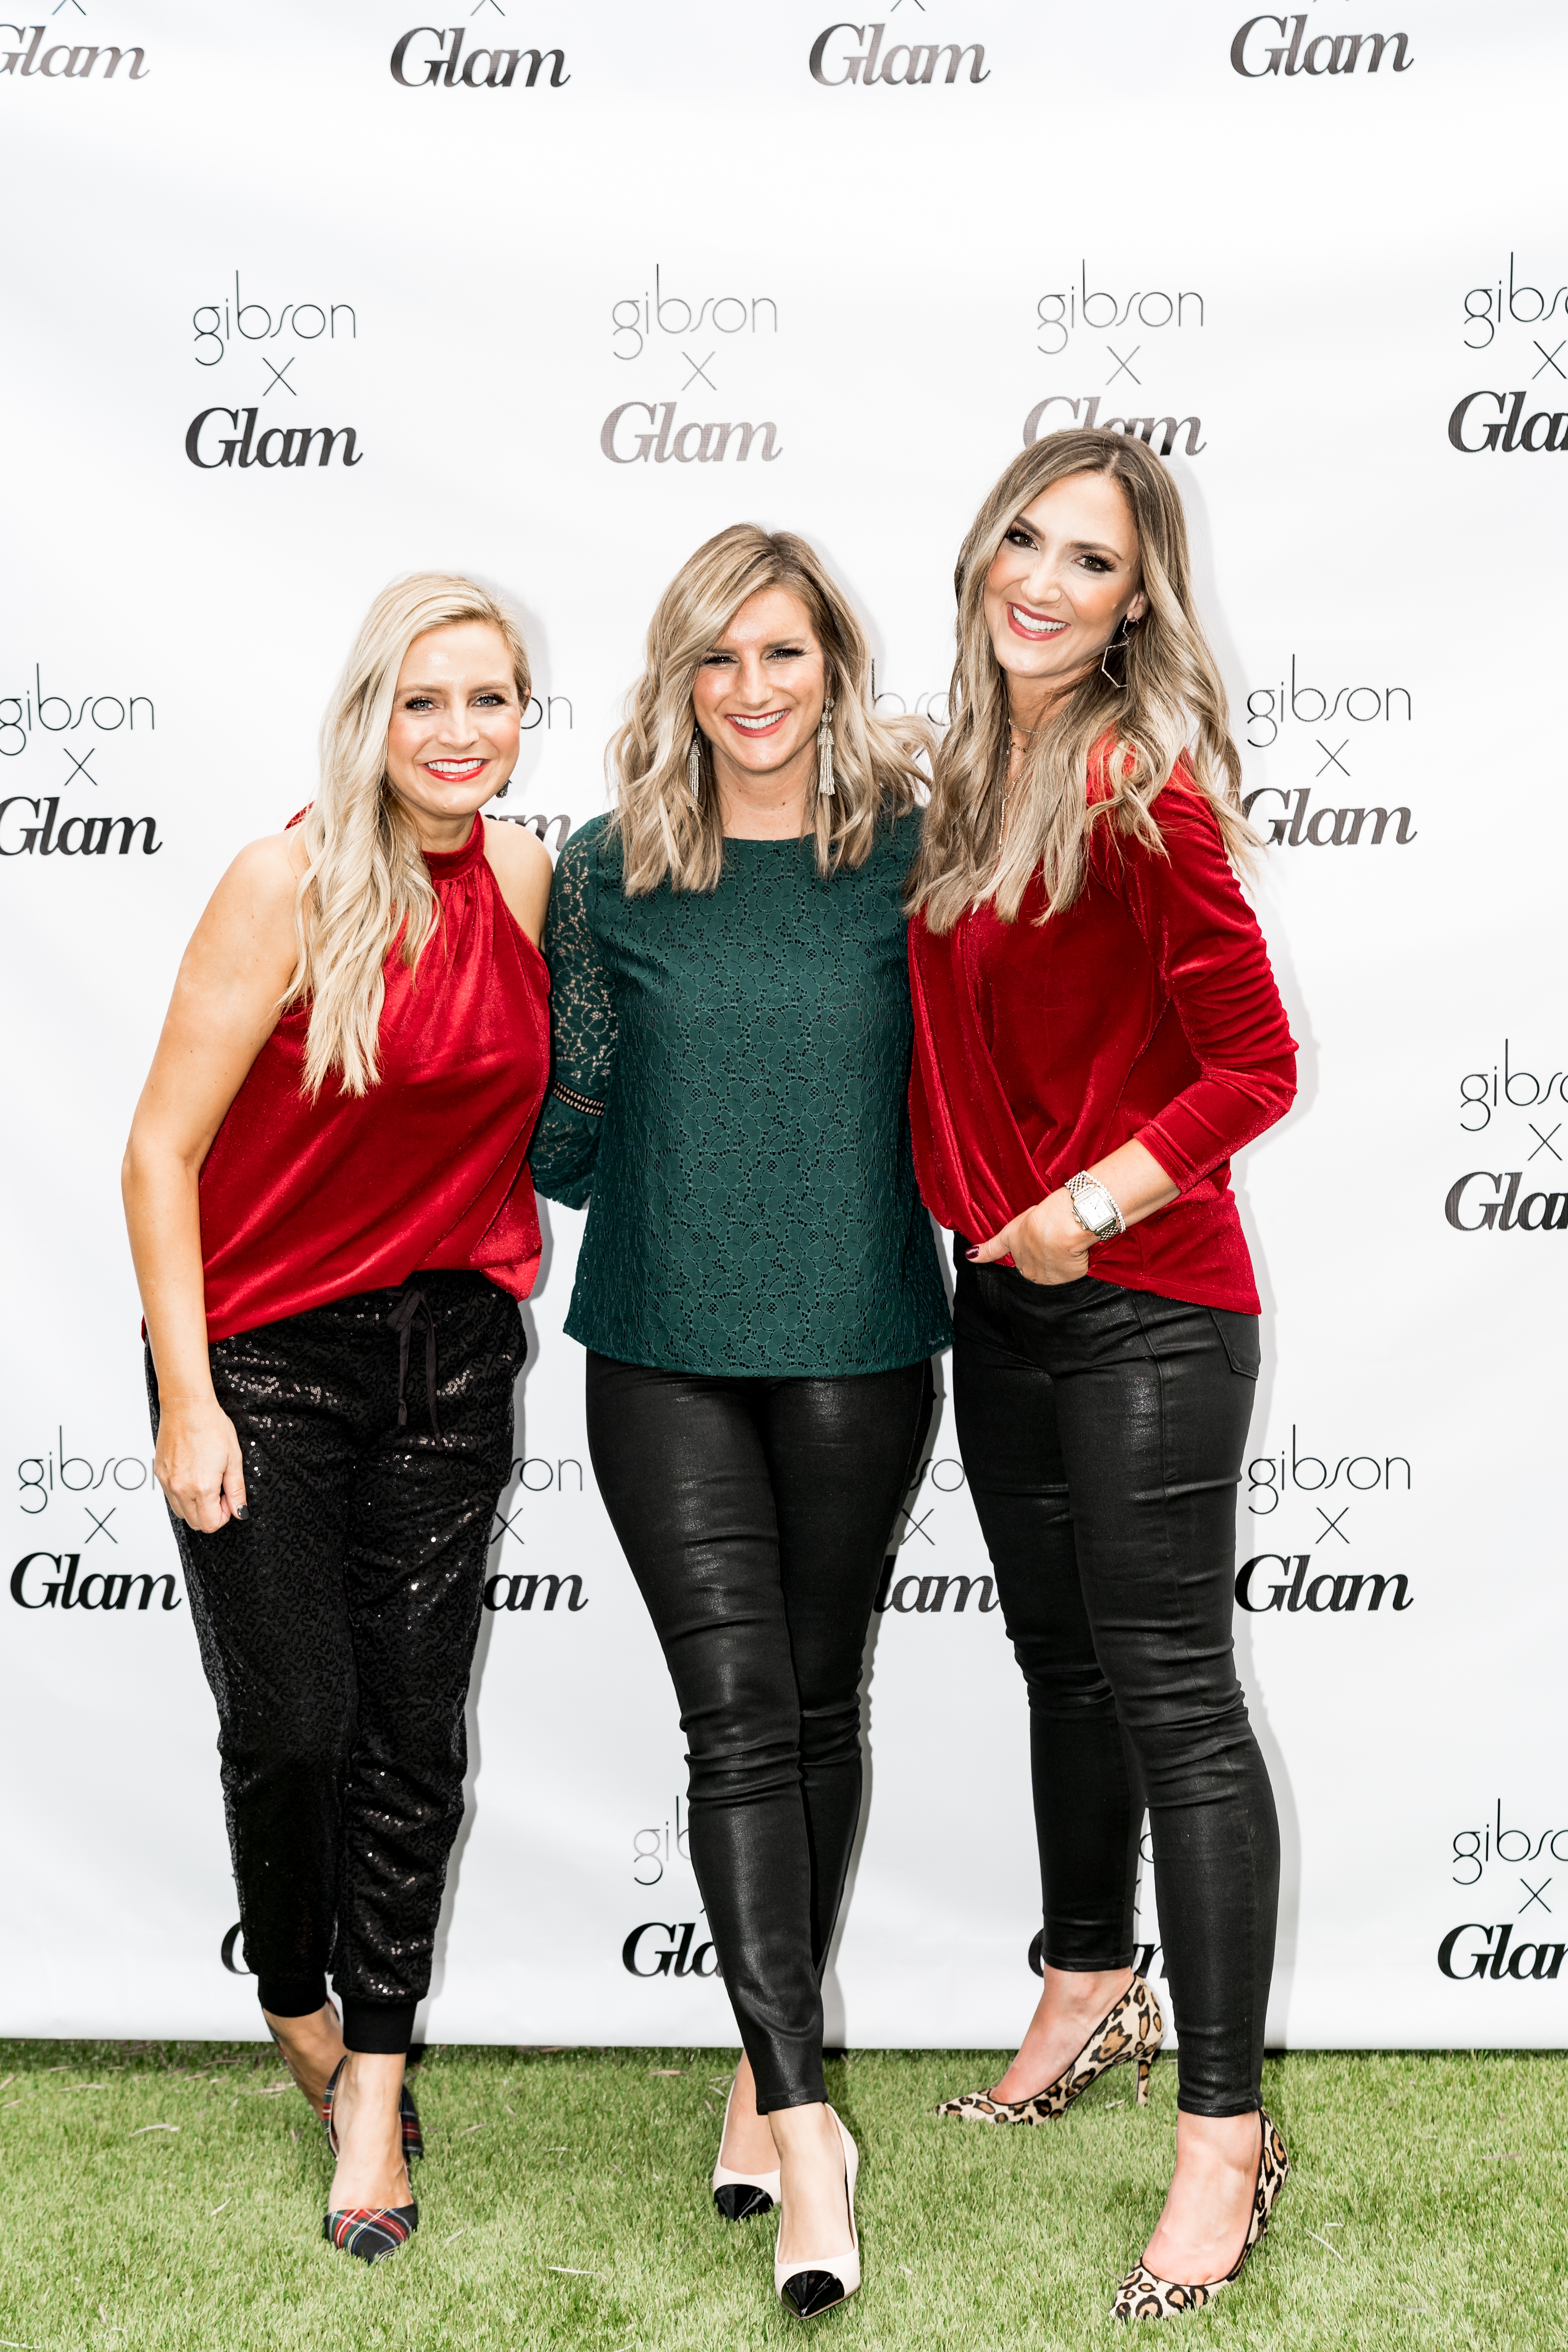 festive red holiday outfit ideas from the gibson glam collection